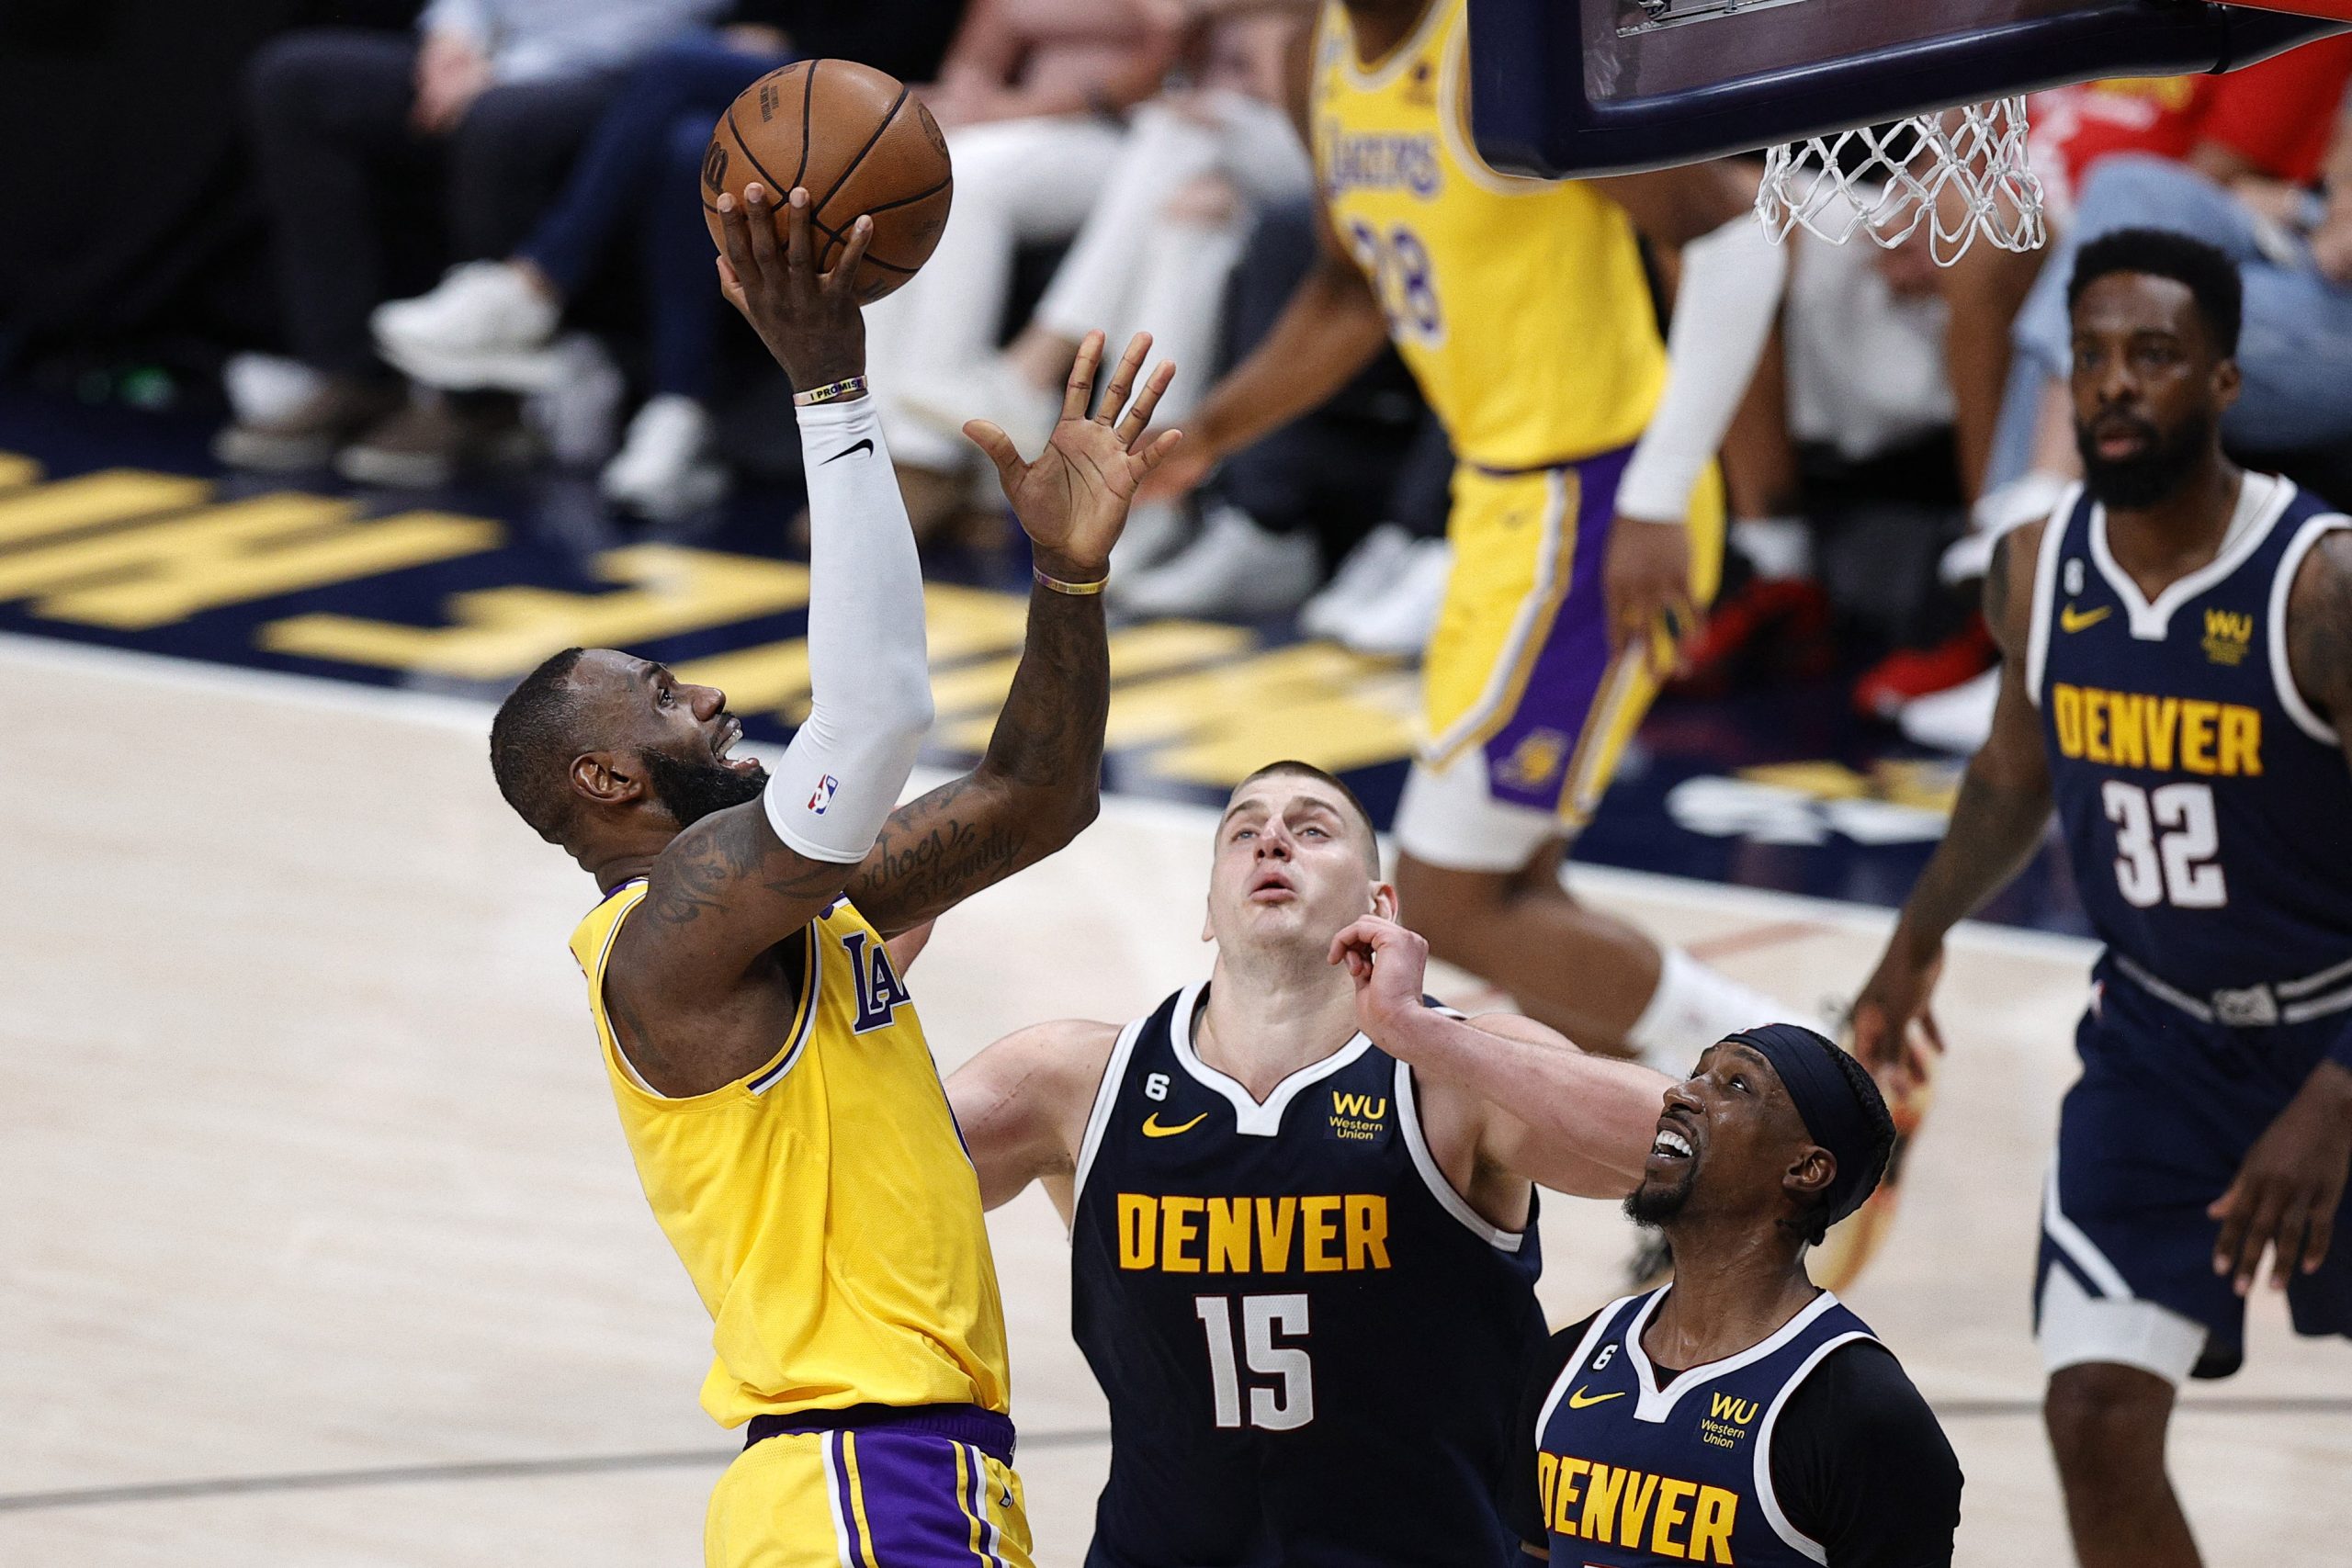 May 18, 2023; Denver, Colorado, USA; Los Angeles Lakers forward LeBron James (6) shoots against Denver Nuggets center Nikola Jokic (15) and guard Kentavious Caldwell-Pope (5) in the third quarter during game two of the Western Conference Finals for the 2023 NBA playoffs at Ball Arena. Mandatory Credit: Isaiah J. Downing-USA TODAY Sports Photo: Isaiah J. Downing/REUTERS